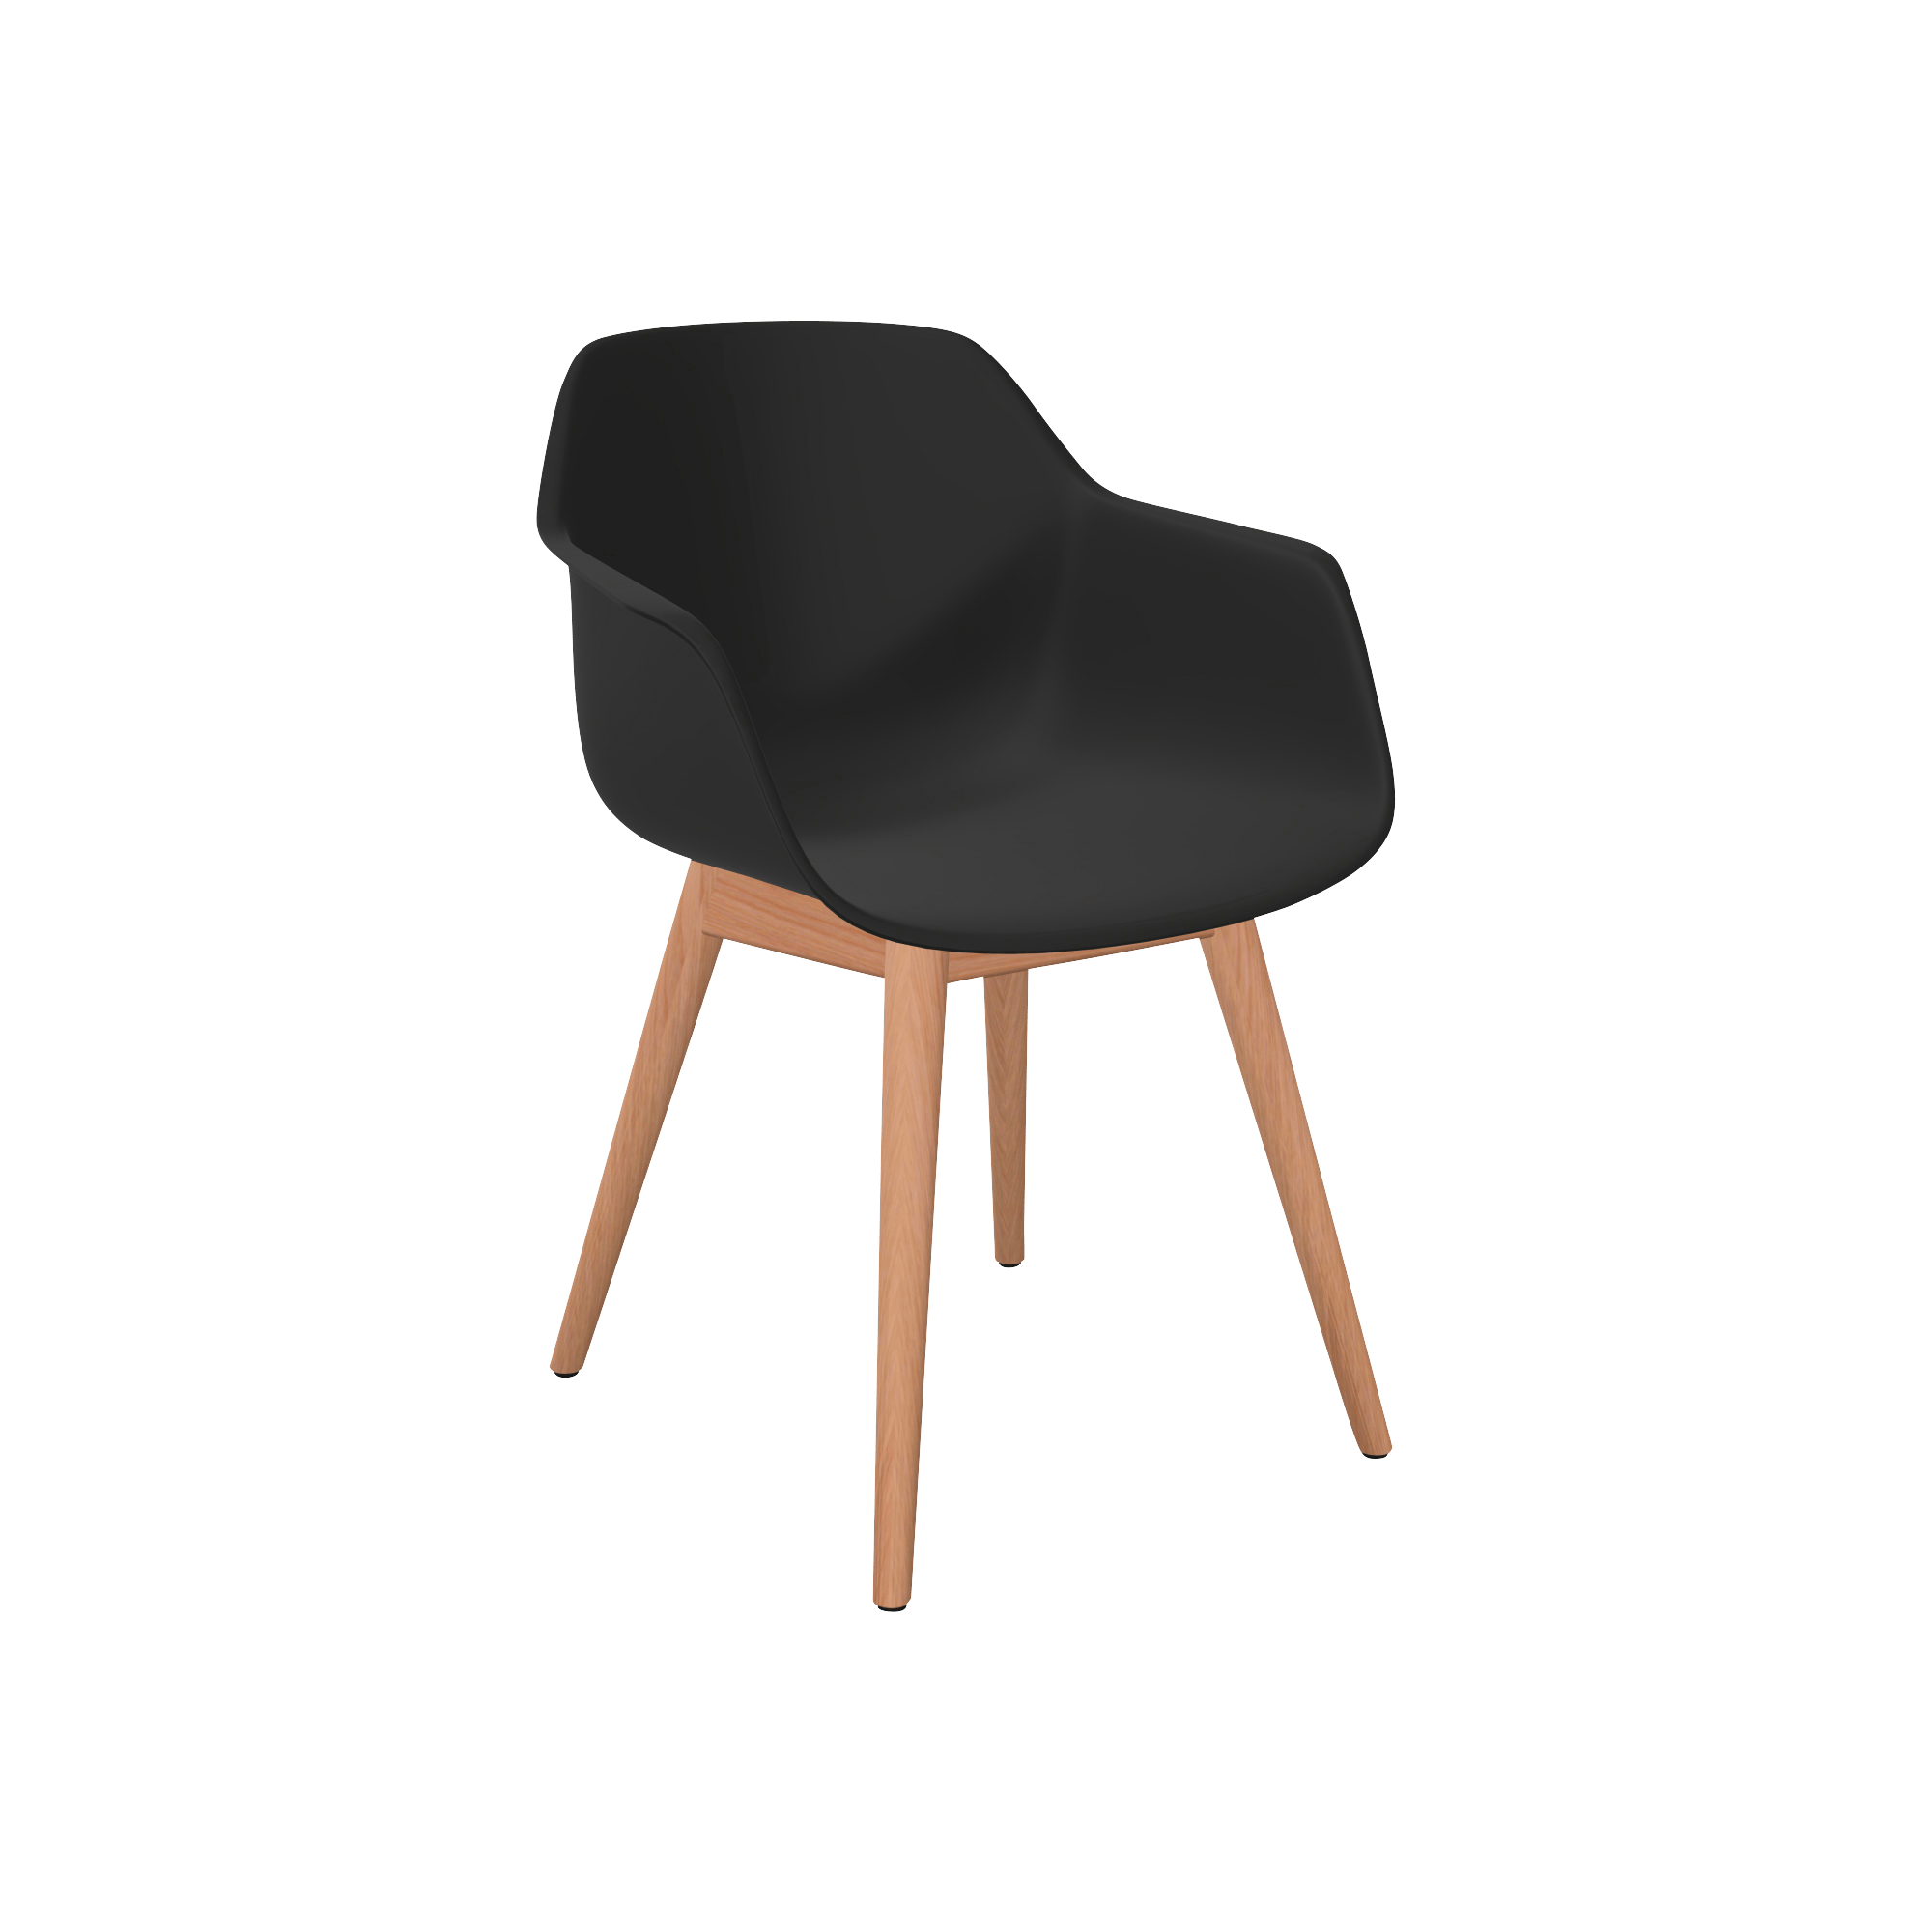 designer office chair with wooden legs